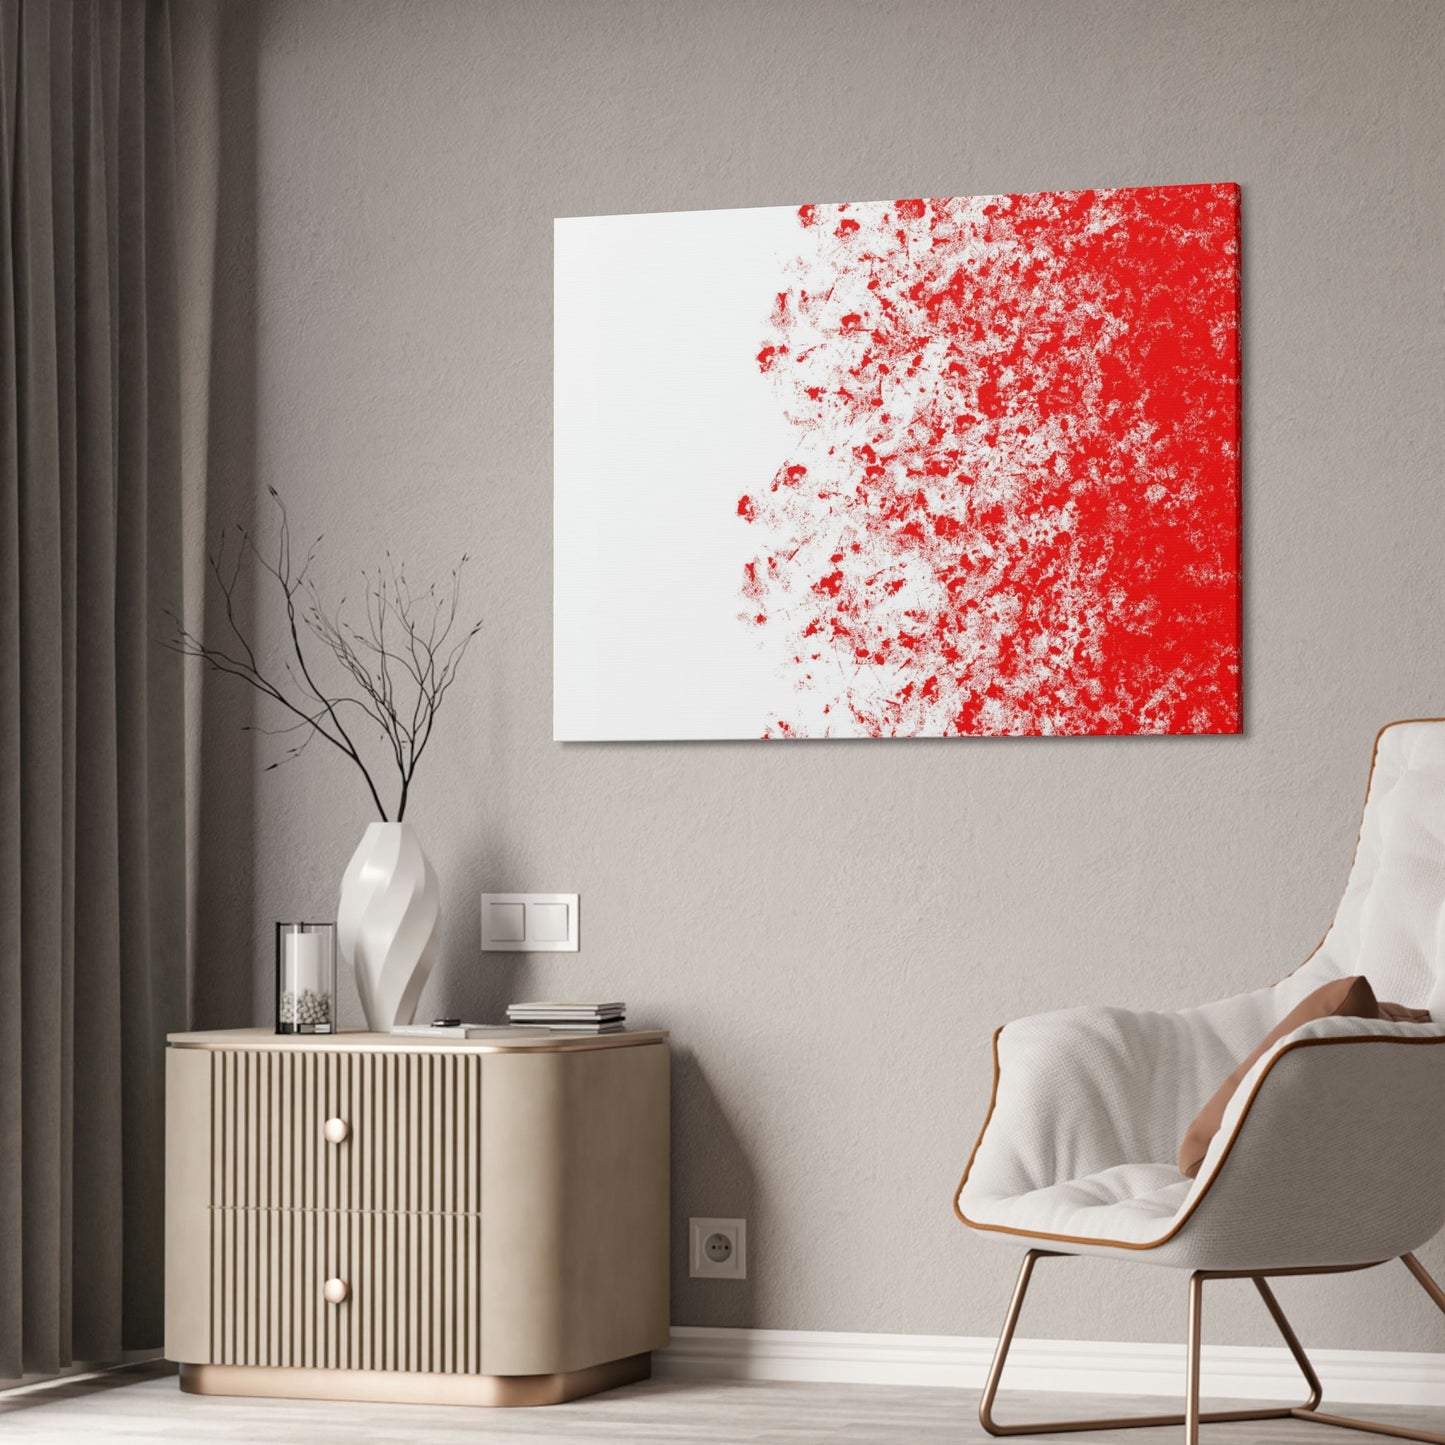 The Art of Warmth: Red Abstract Framed Posters and Print on Canvas